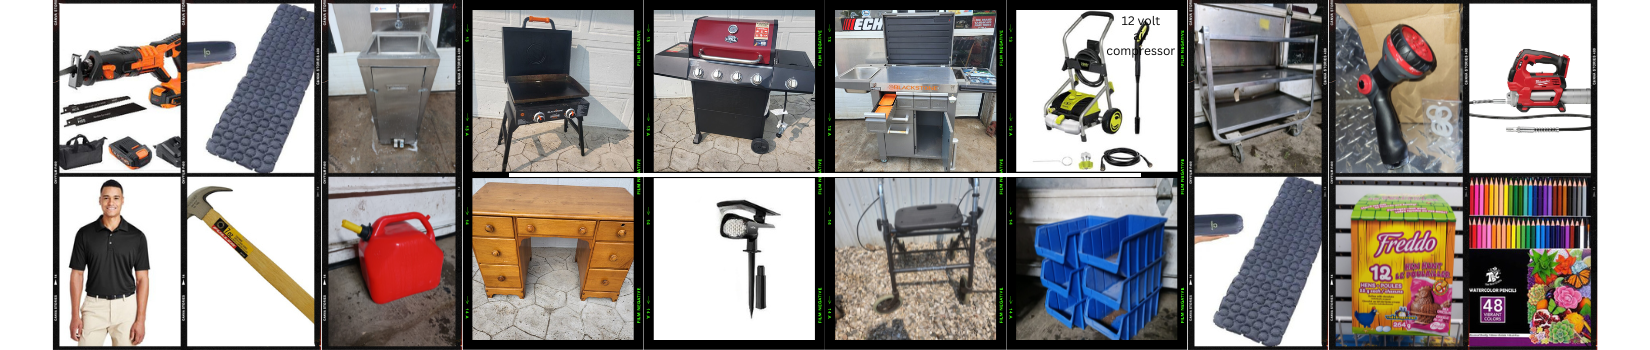 Zehr's Sale May 25th Lawn Mowers, Equipment, Tools and More Online Auction